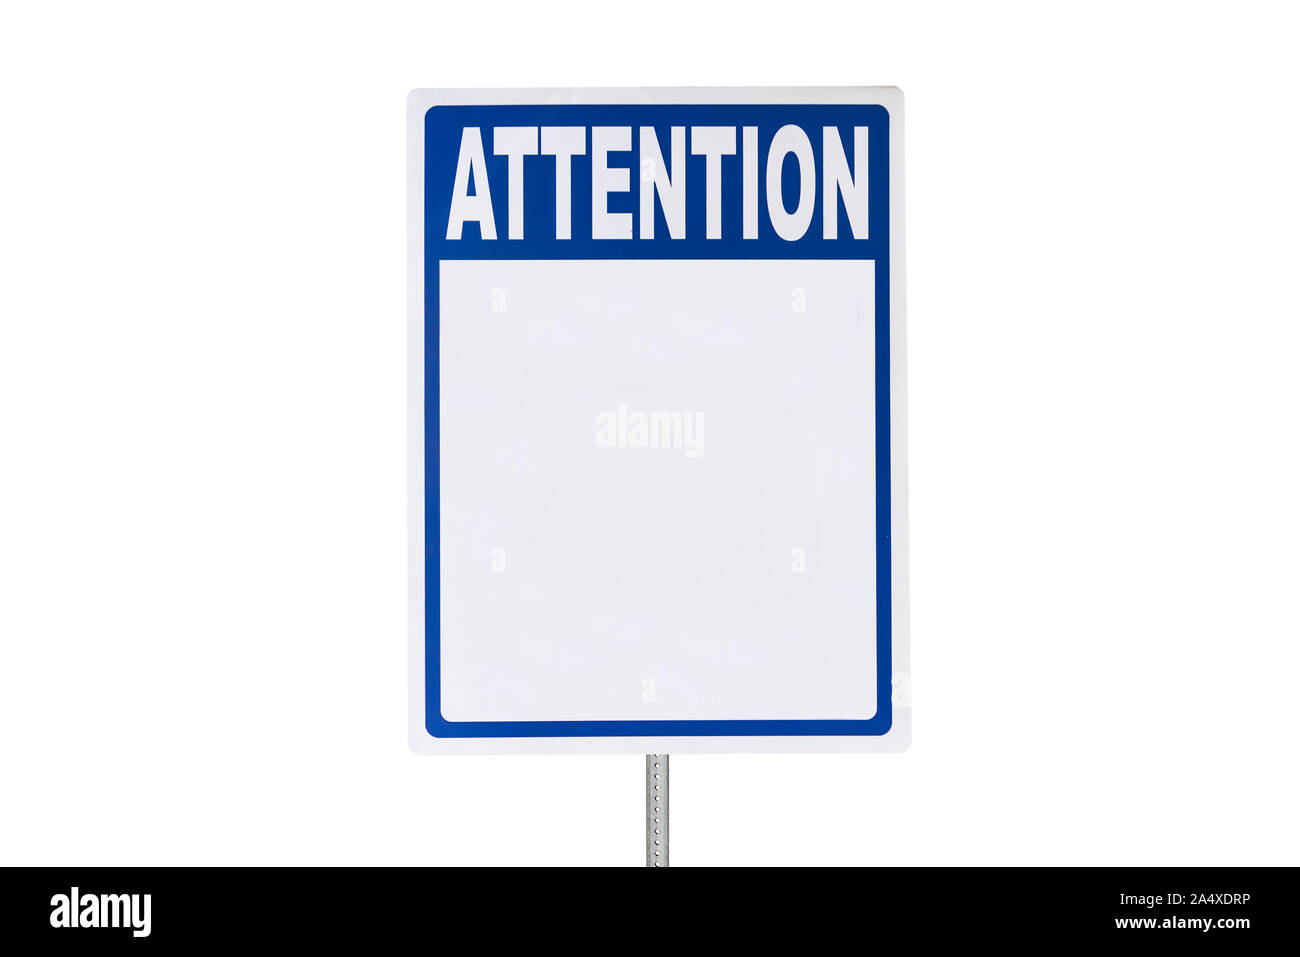 Blank attention sign isolated on white. Stock Photo